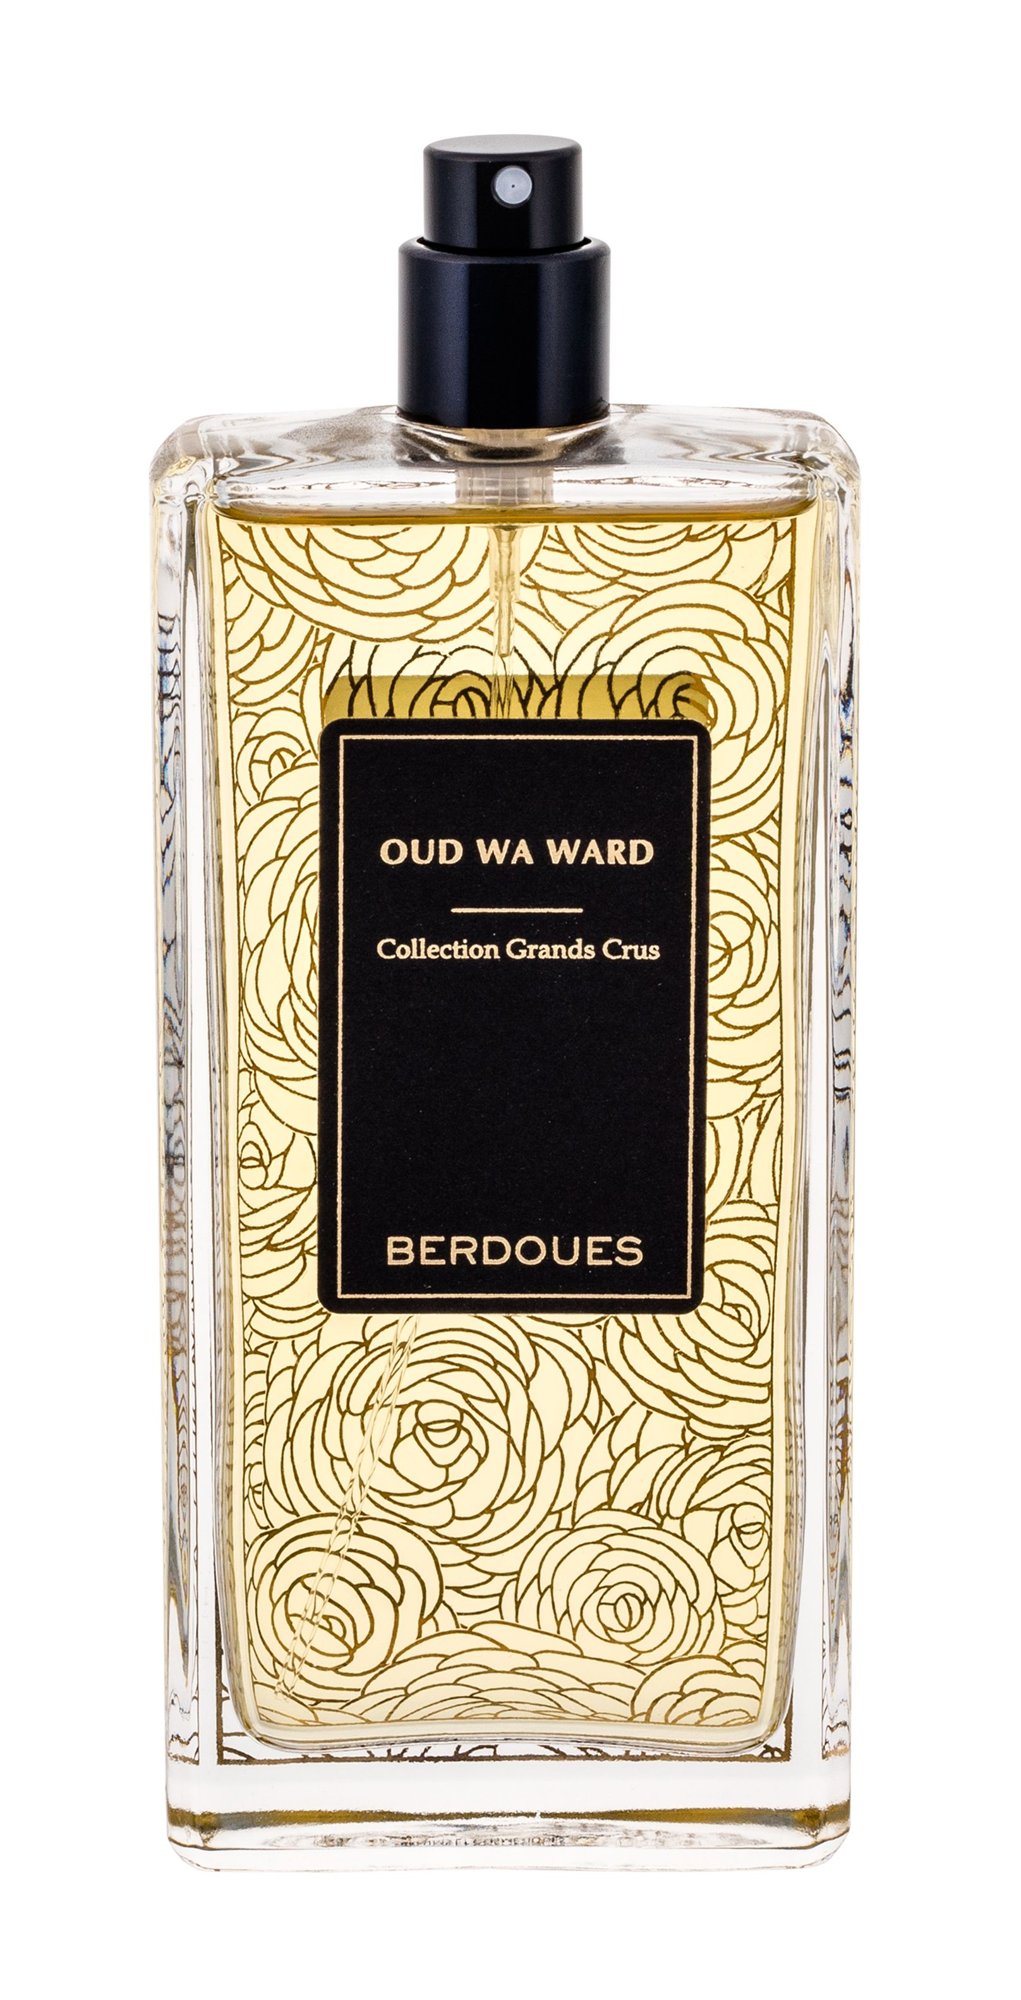 Berdoues Collection Grands Crus Oud Wa Ward